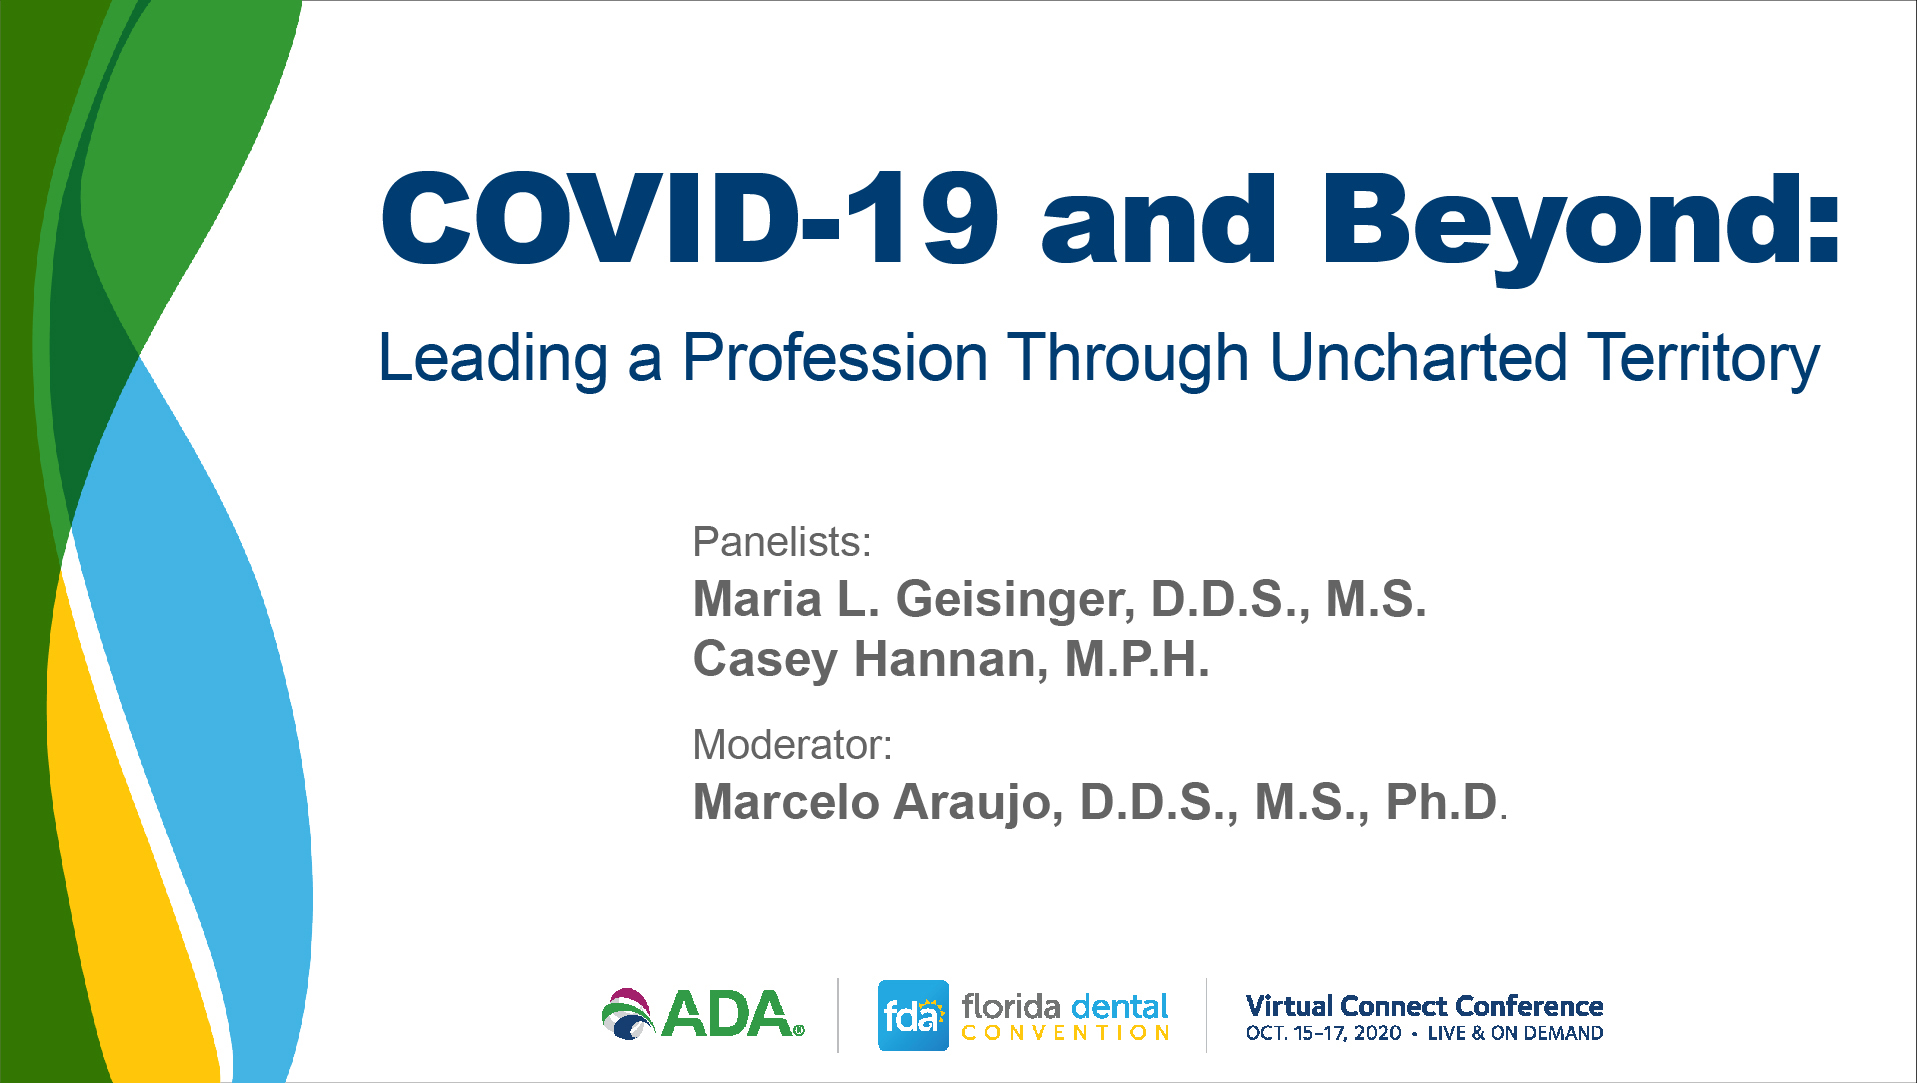 COVID-19 and Beyond: Leading a Profession Through Uncharted Territory (2020 VCC Opening Session)